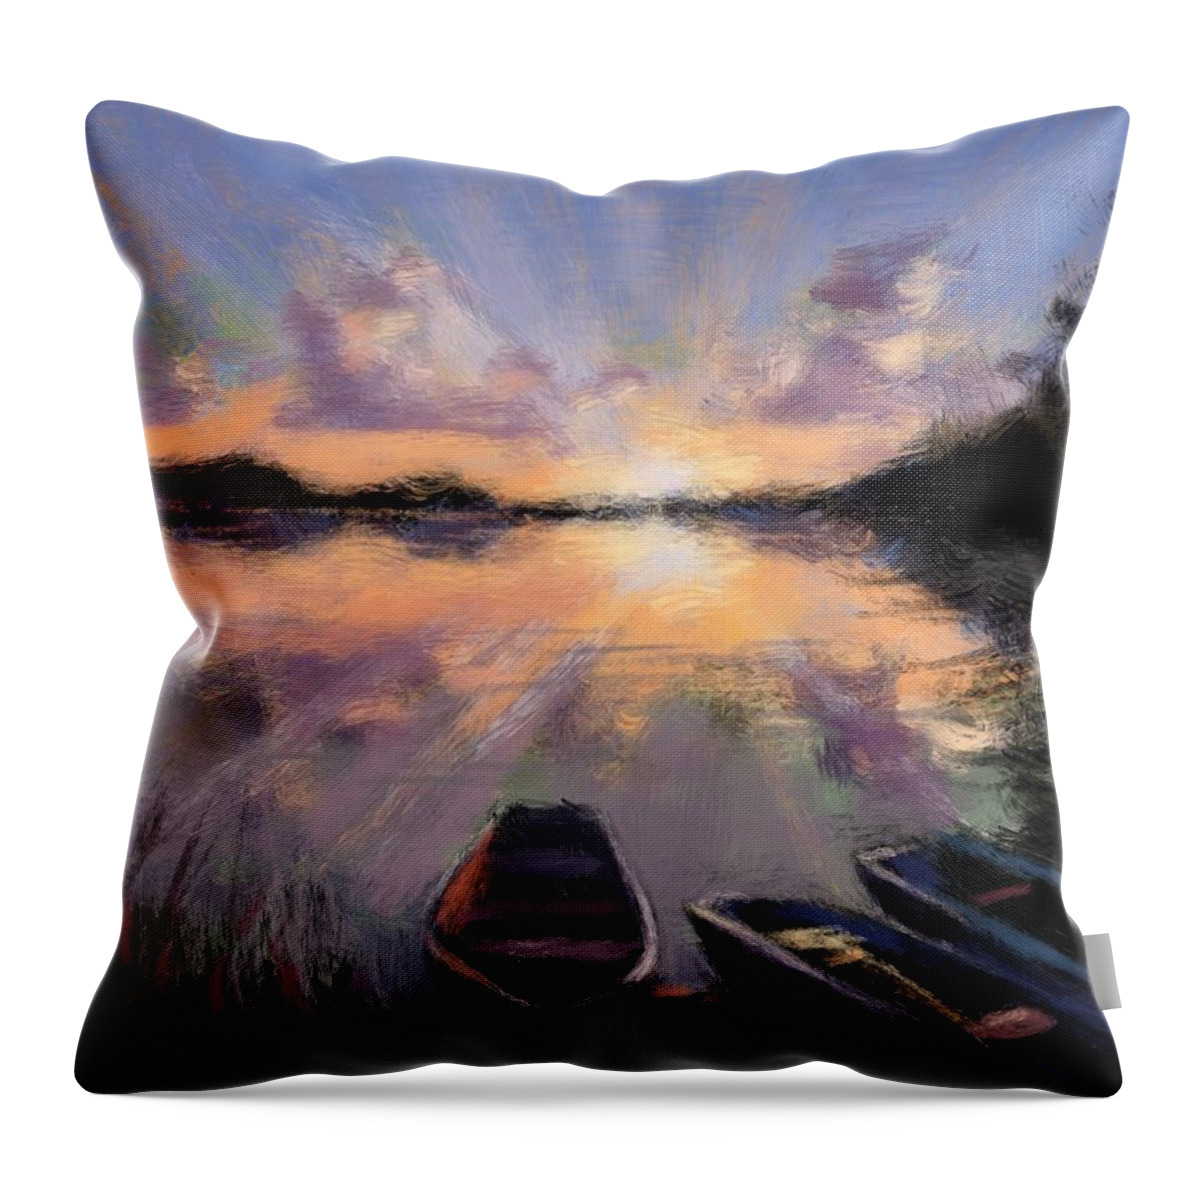 Rowboat Throw Pillow featuring the painting Rowboat Sunset by Larry Whitler